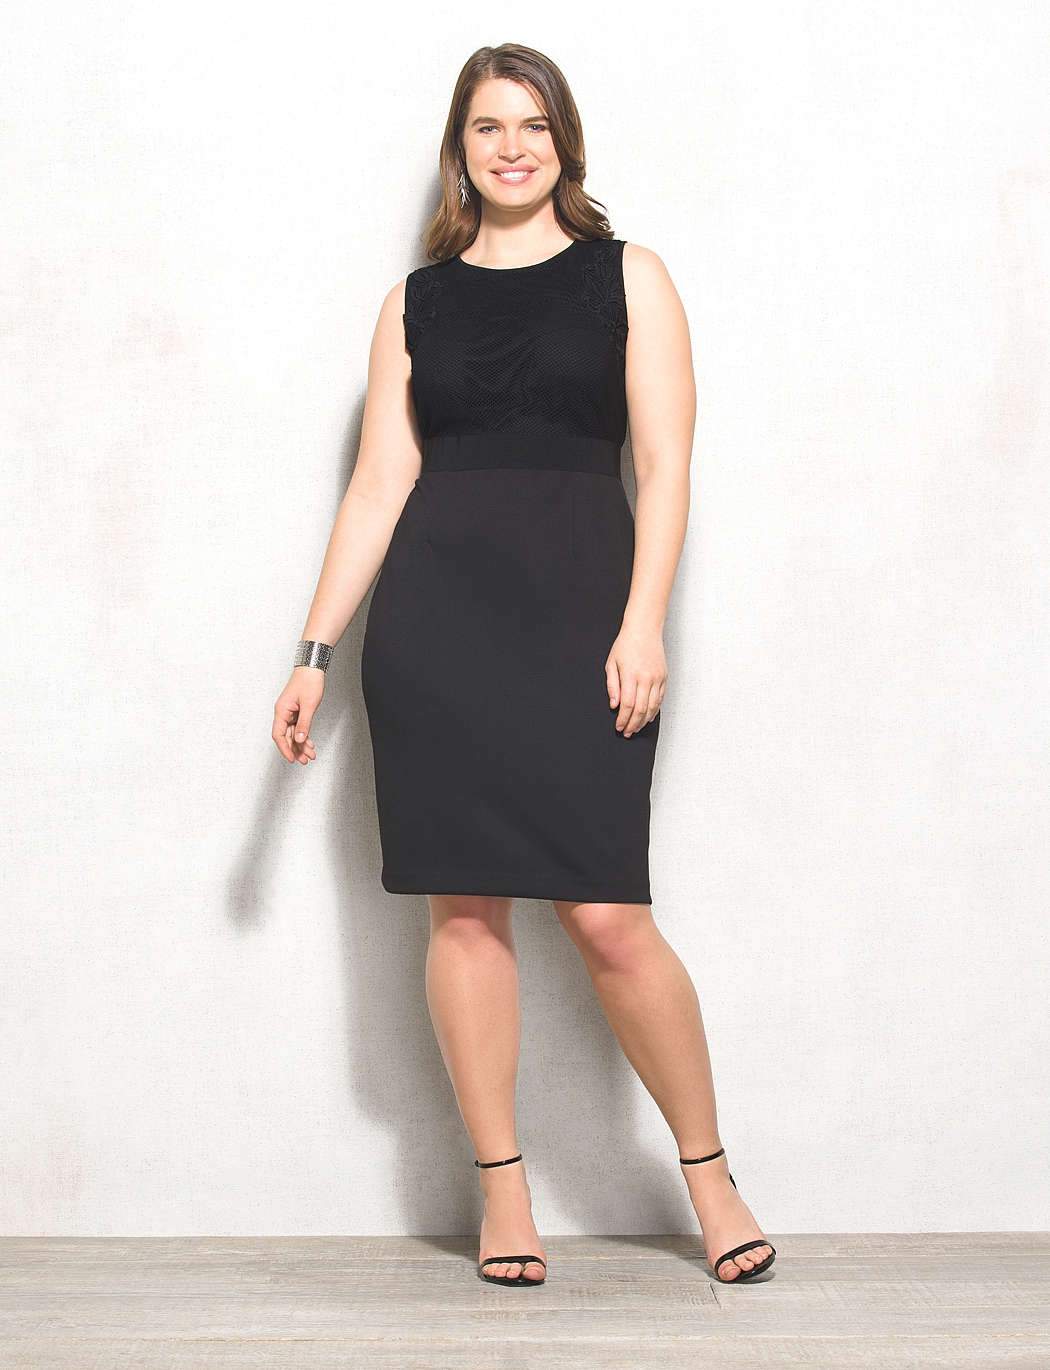 Beyond By Ashley Graham for DressBarn- The Lace Scuba Dress